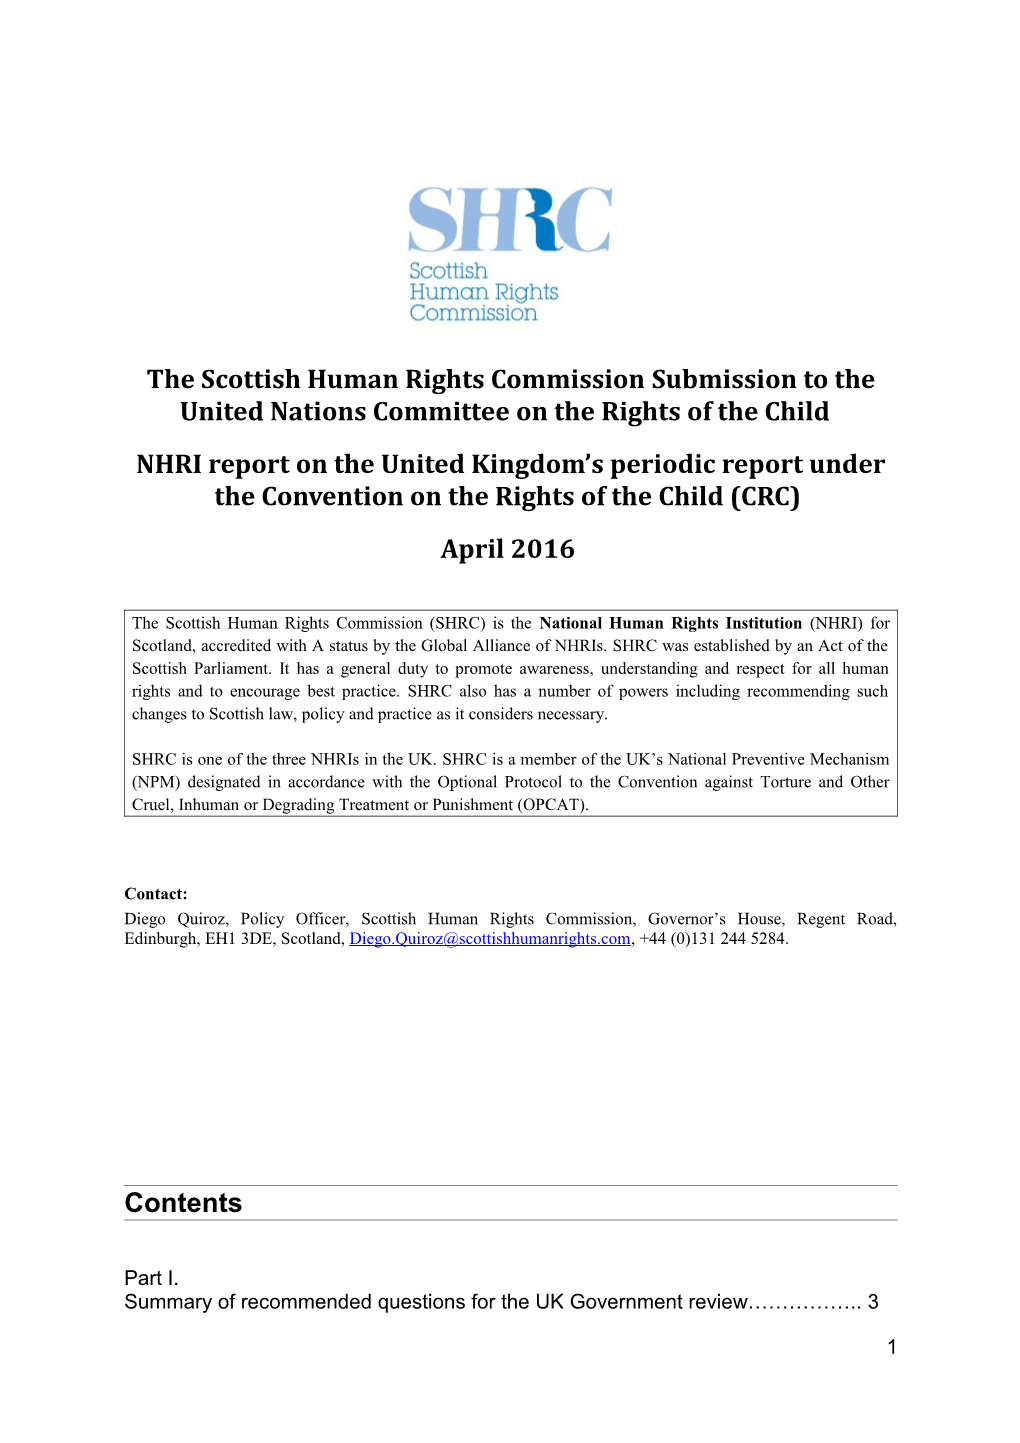 The Scottish Human Rights Commission Submission to the United Nations Committee on The